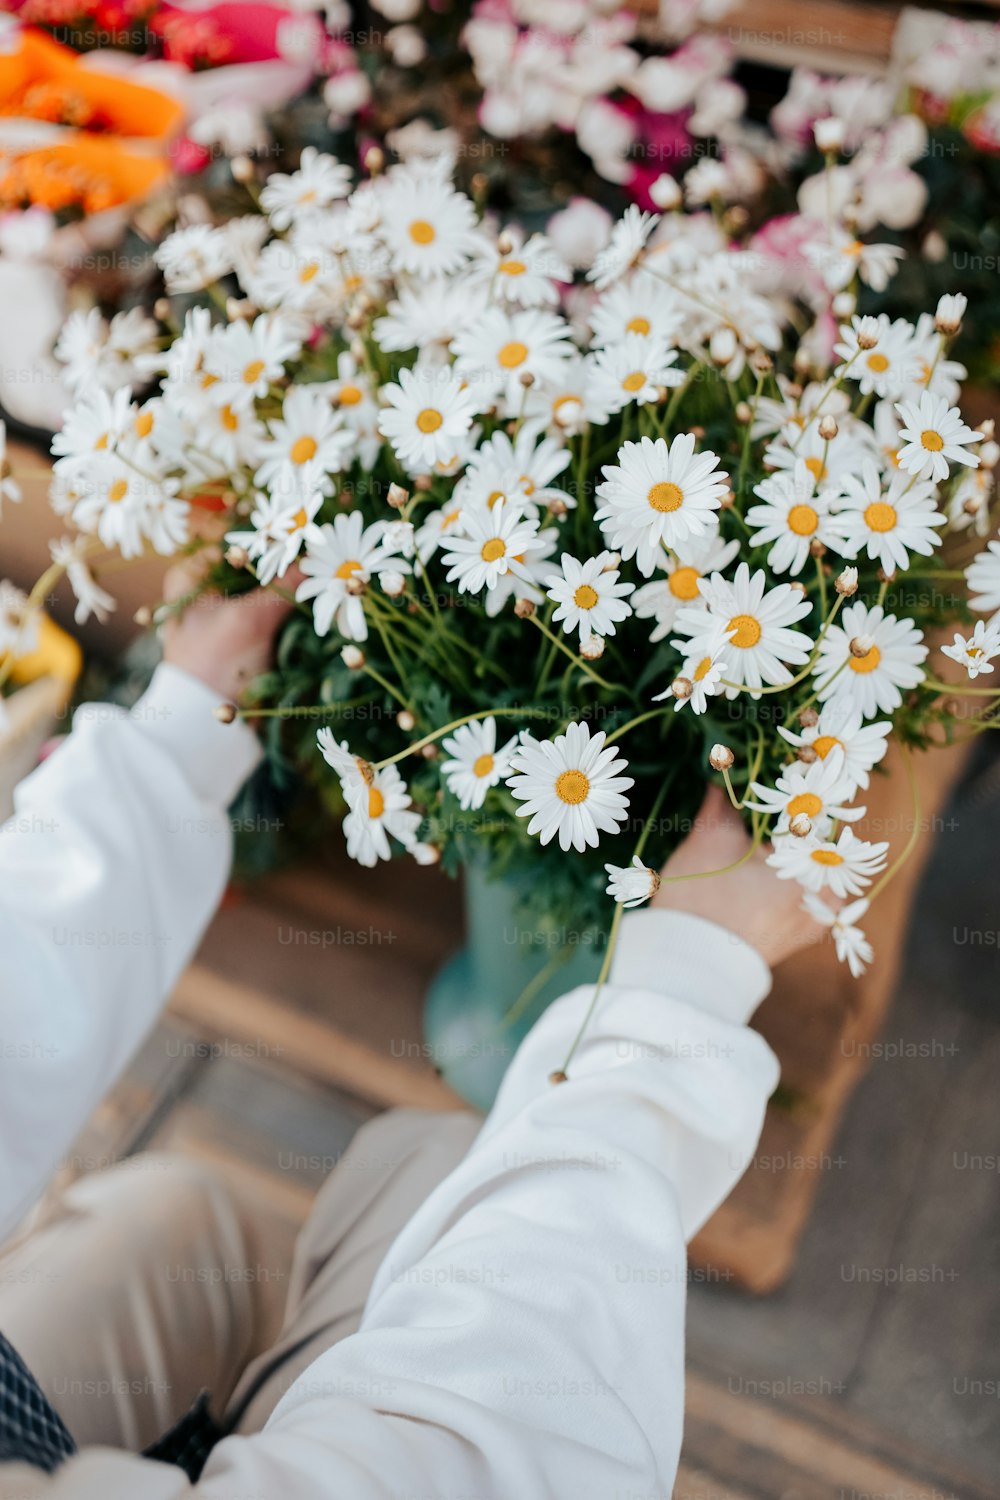 a person holding a vase full of daisies